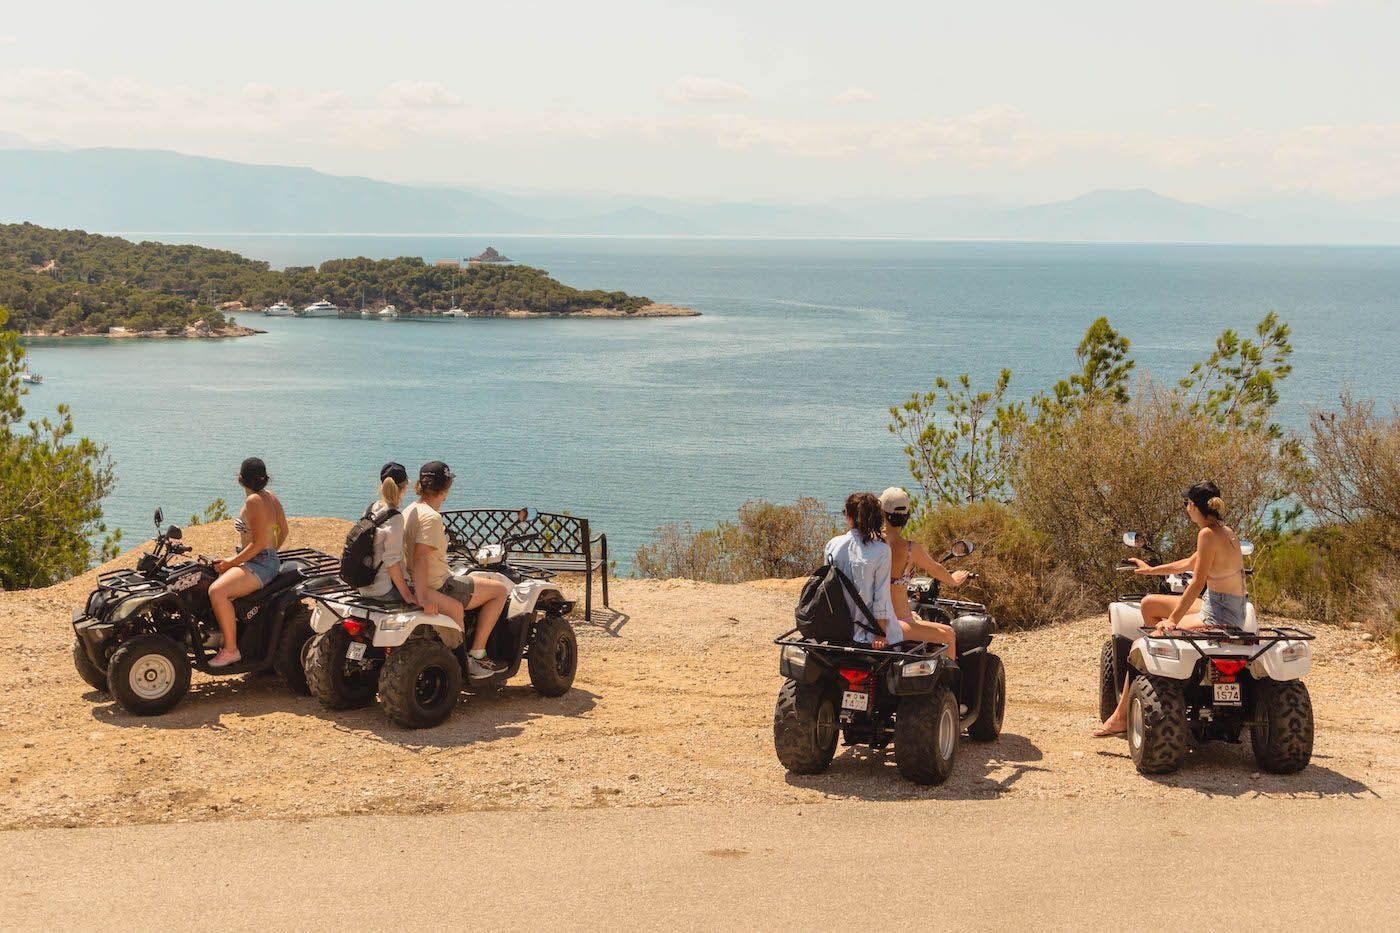 Photo of quad bikes with people on a cliffside in Spetses Greece. Photo by Ryan Brown of LostBoyMemoirs.com